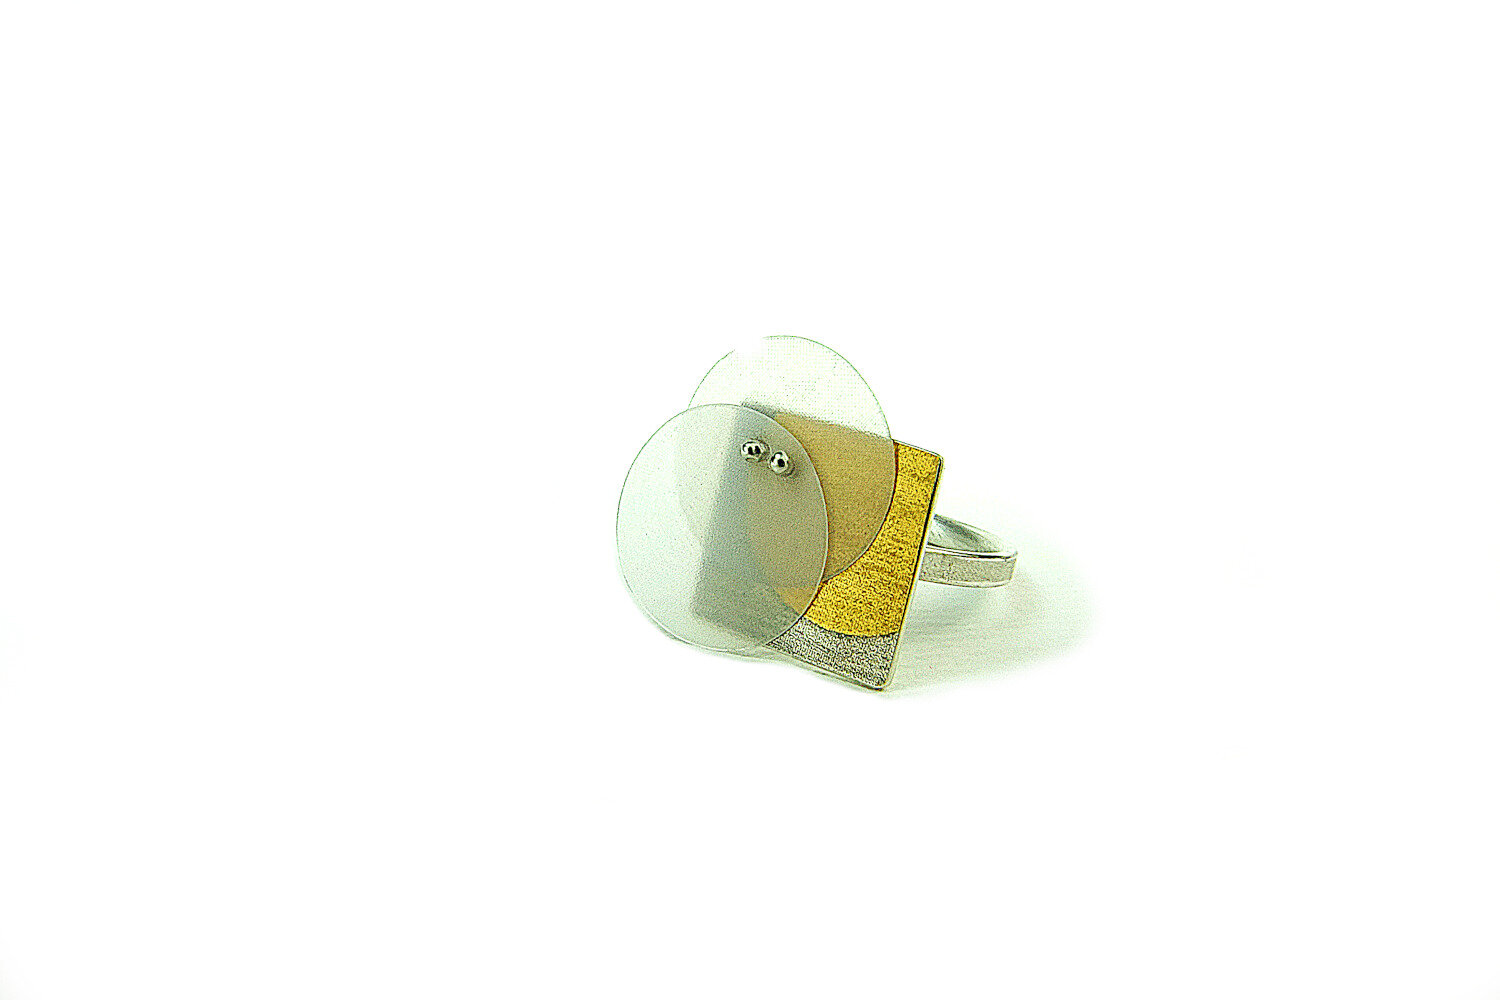 silver-gold-ring-with-hdpe-discs-hbm113a-9173.JPG